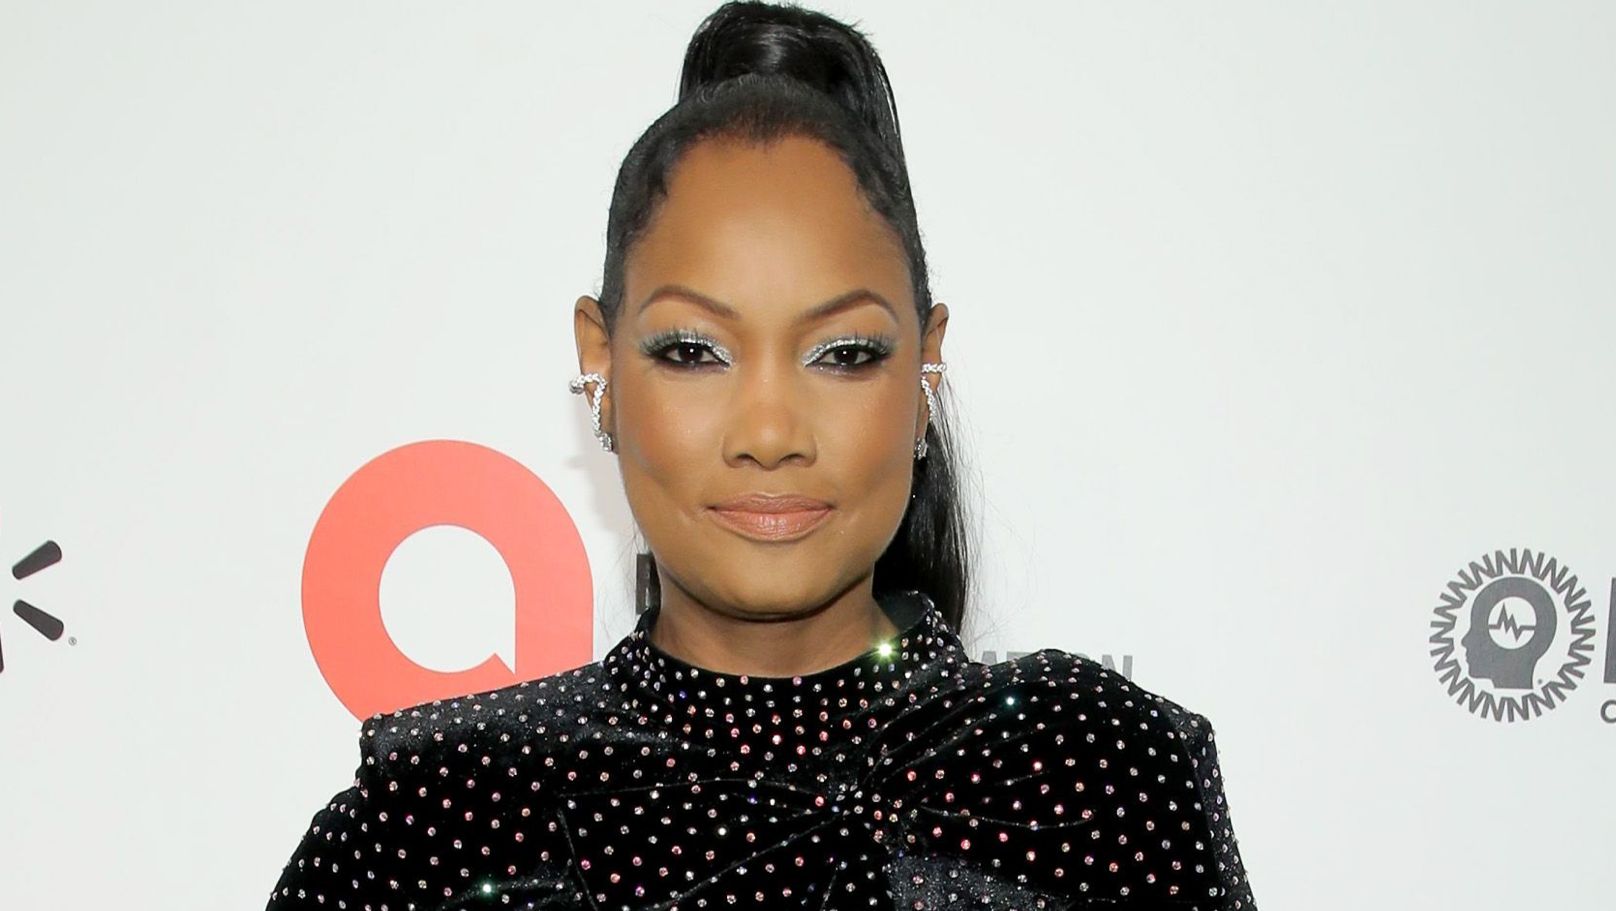 Garcelle Beauvais wears a high ponytail and metallic eyeshadow.